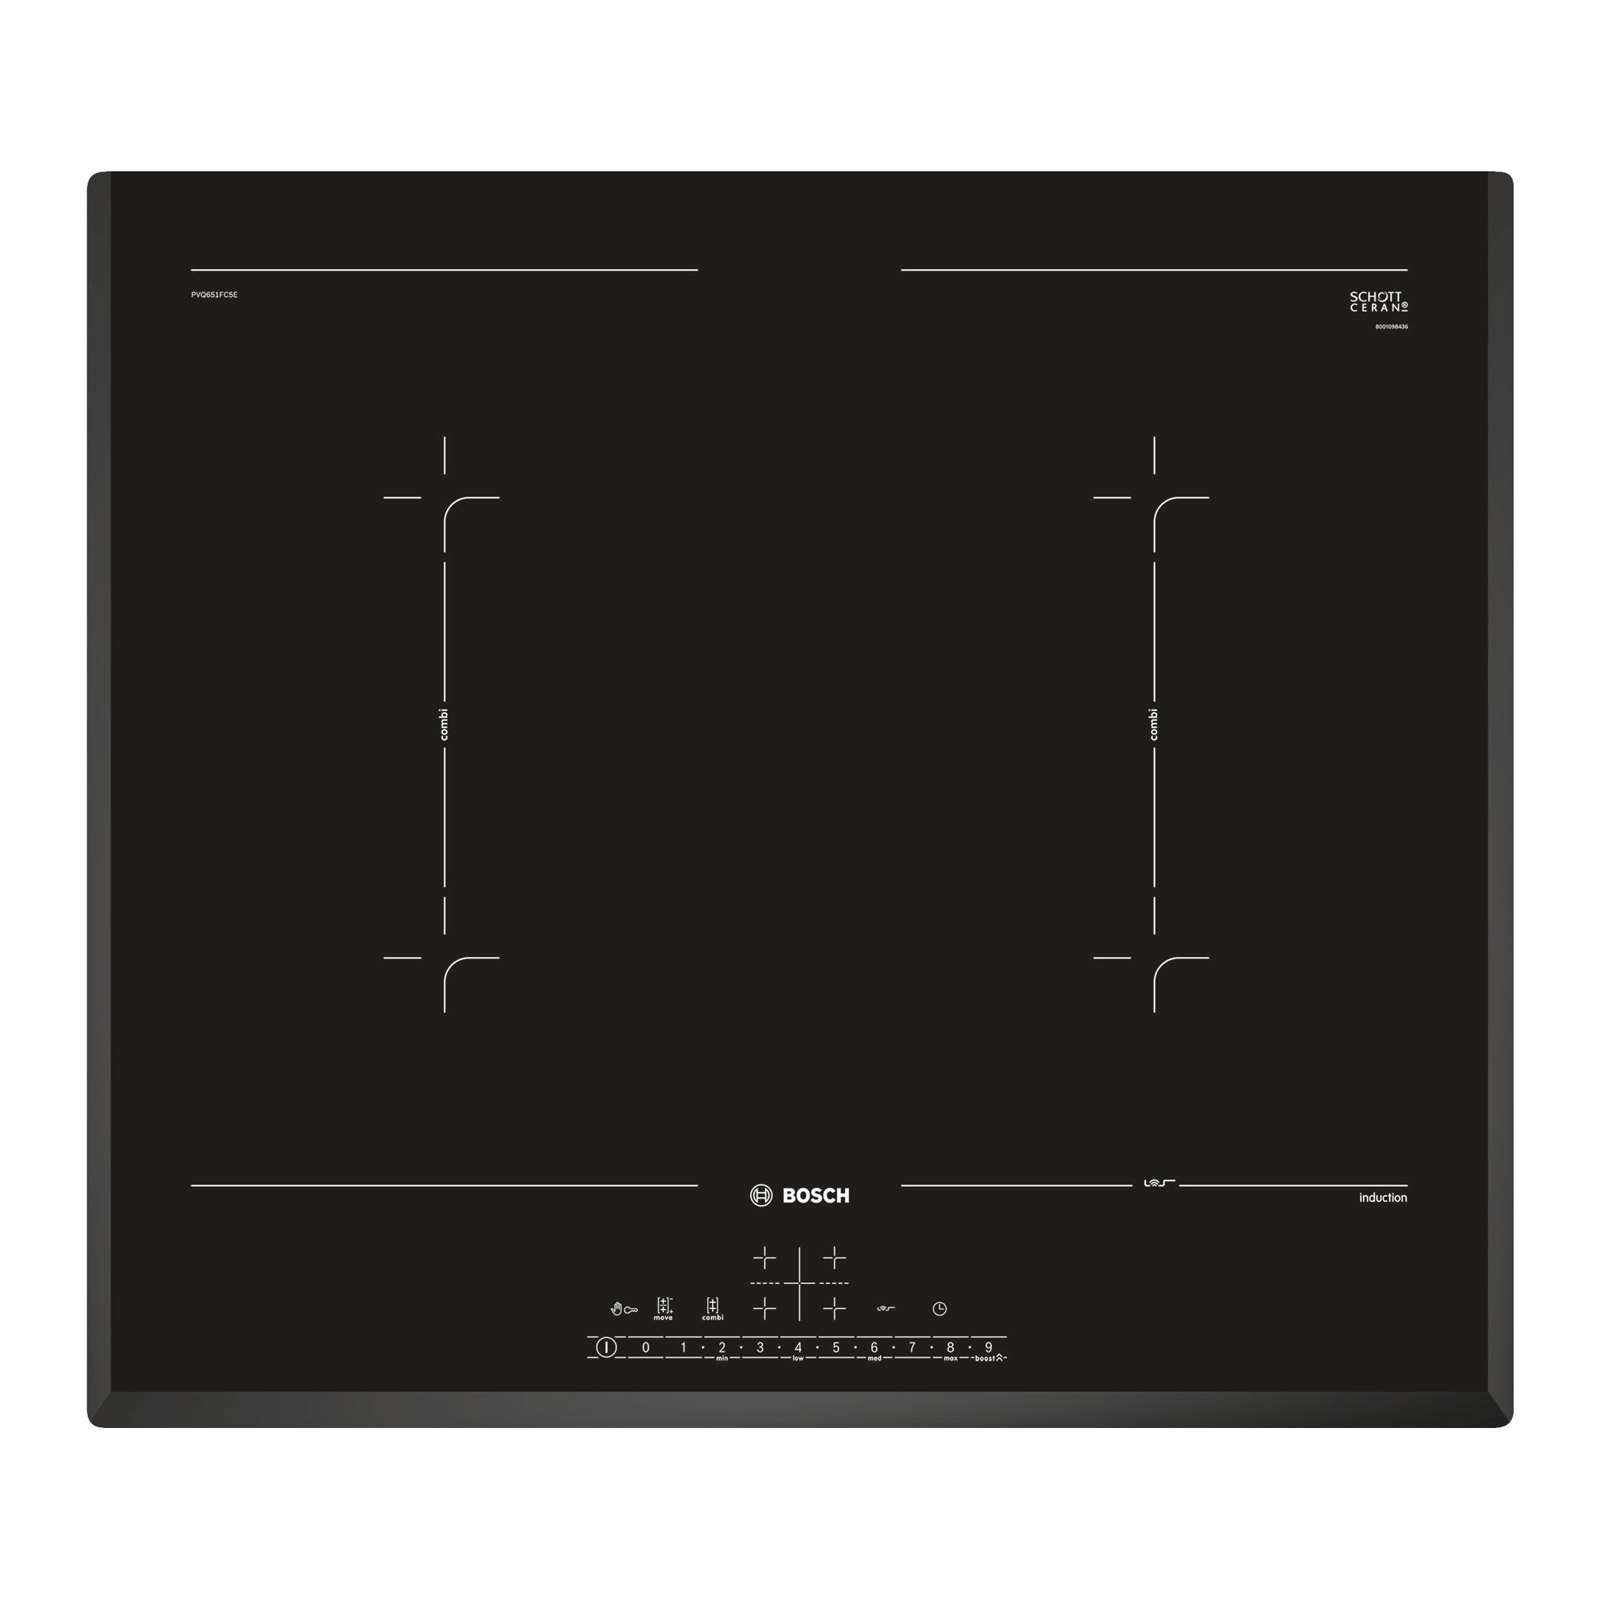 Image of Bosch PVQ651FC5E Series 6 60cm 4 Zone Induction Hob in Black Glass